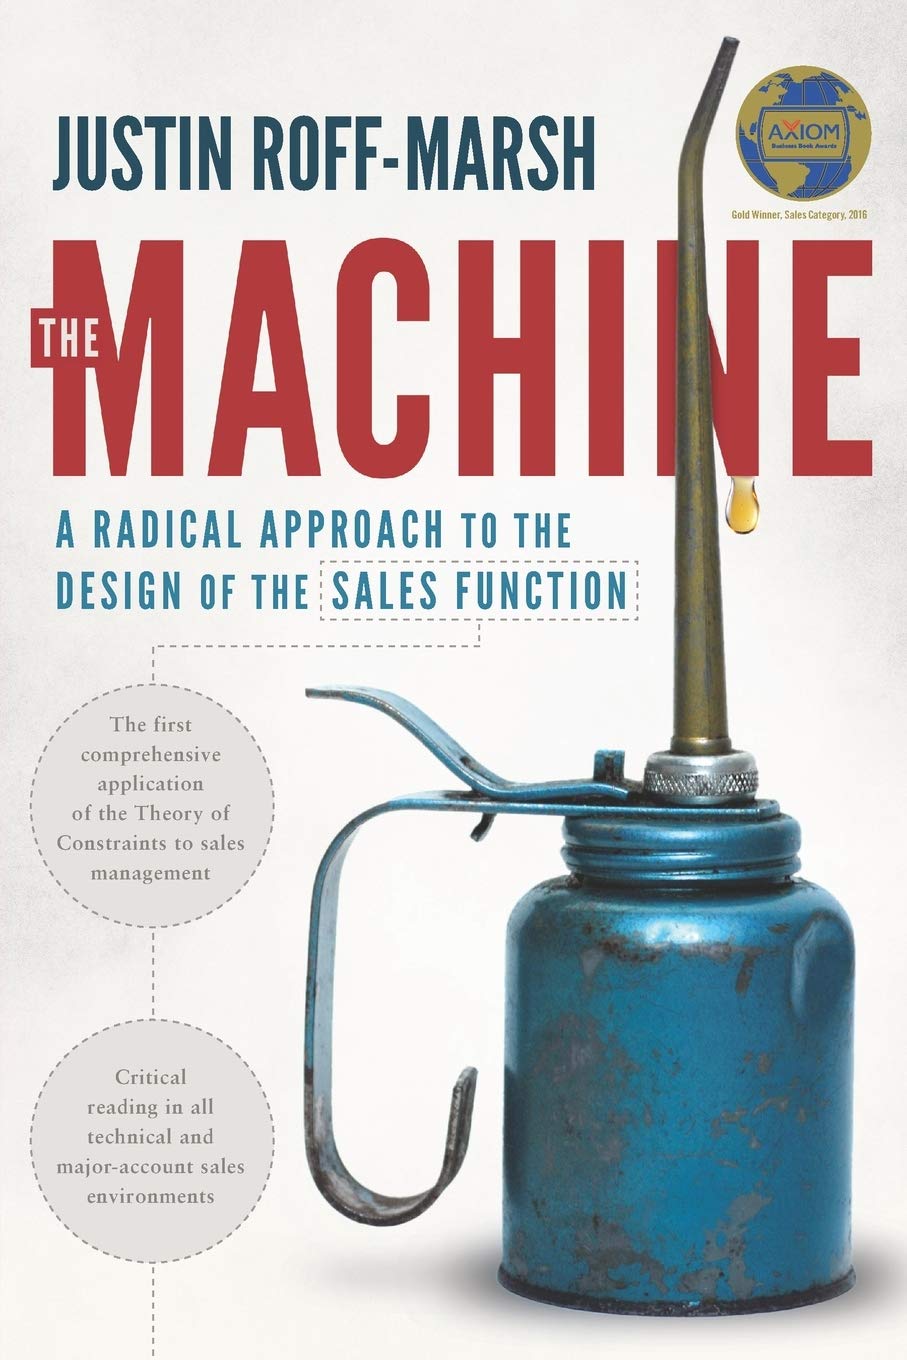 The Machine: A Radical Approach to the Design of the Sales Function